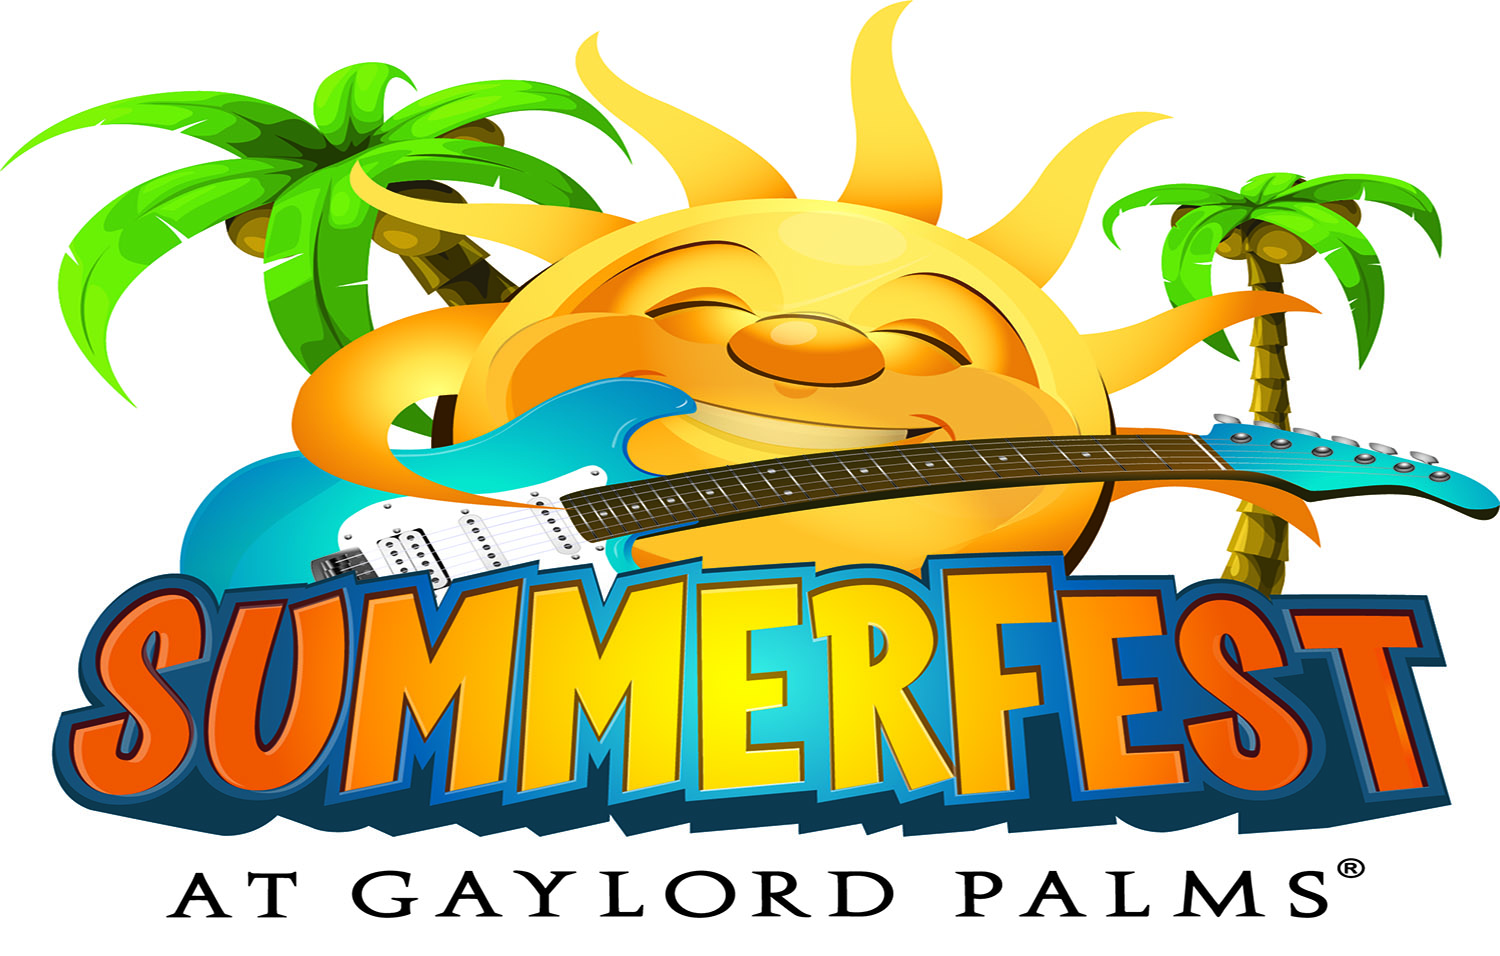 Summerfest: 12 Reasons to Stay at Gaylord Palms